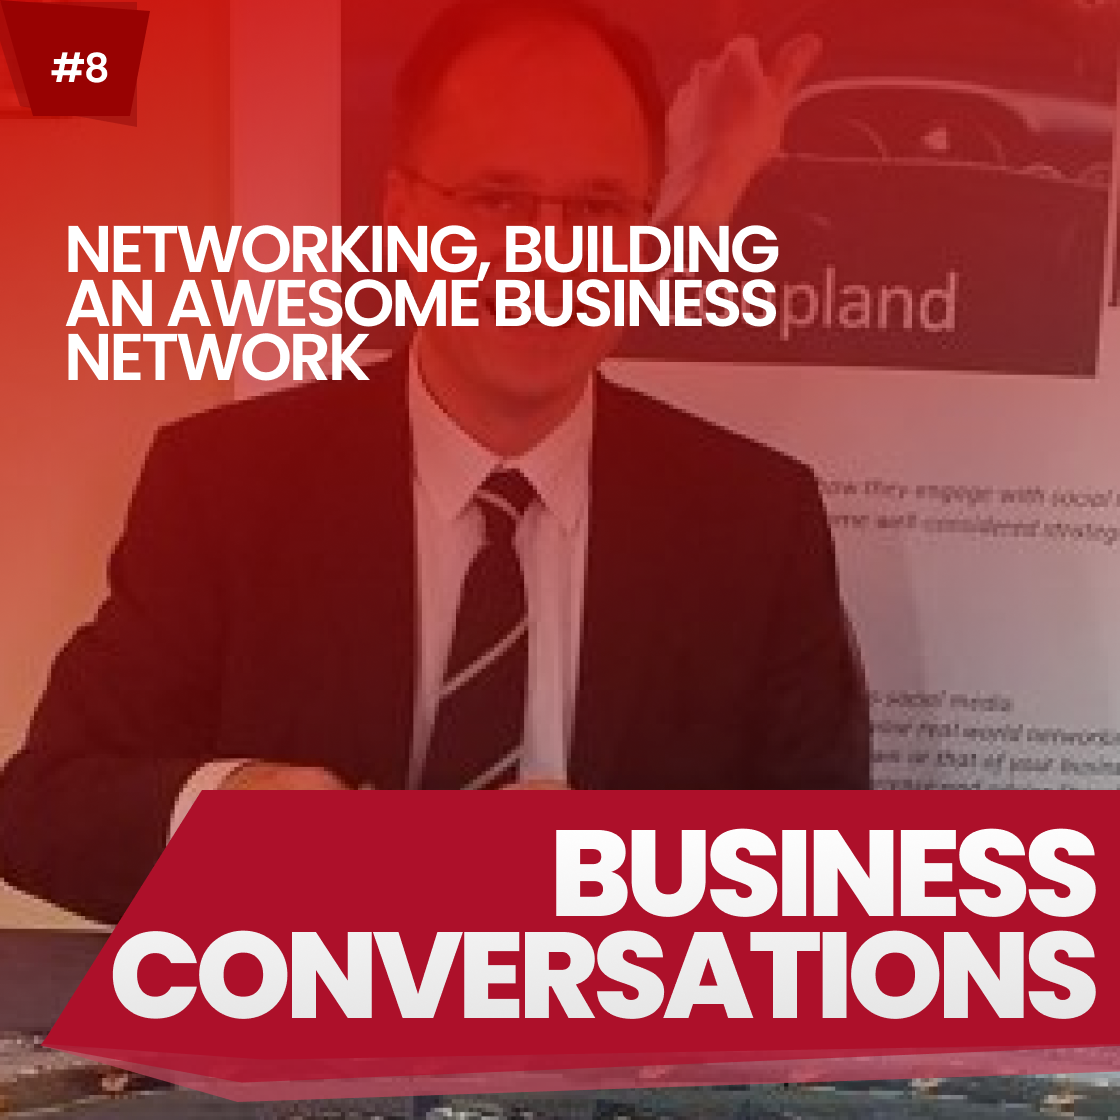 NETWORKING, BUILDING AN AWESOME BUSINESS NETWORK